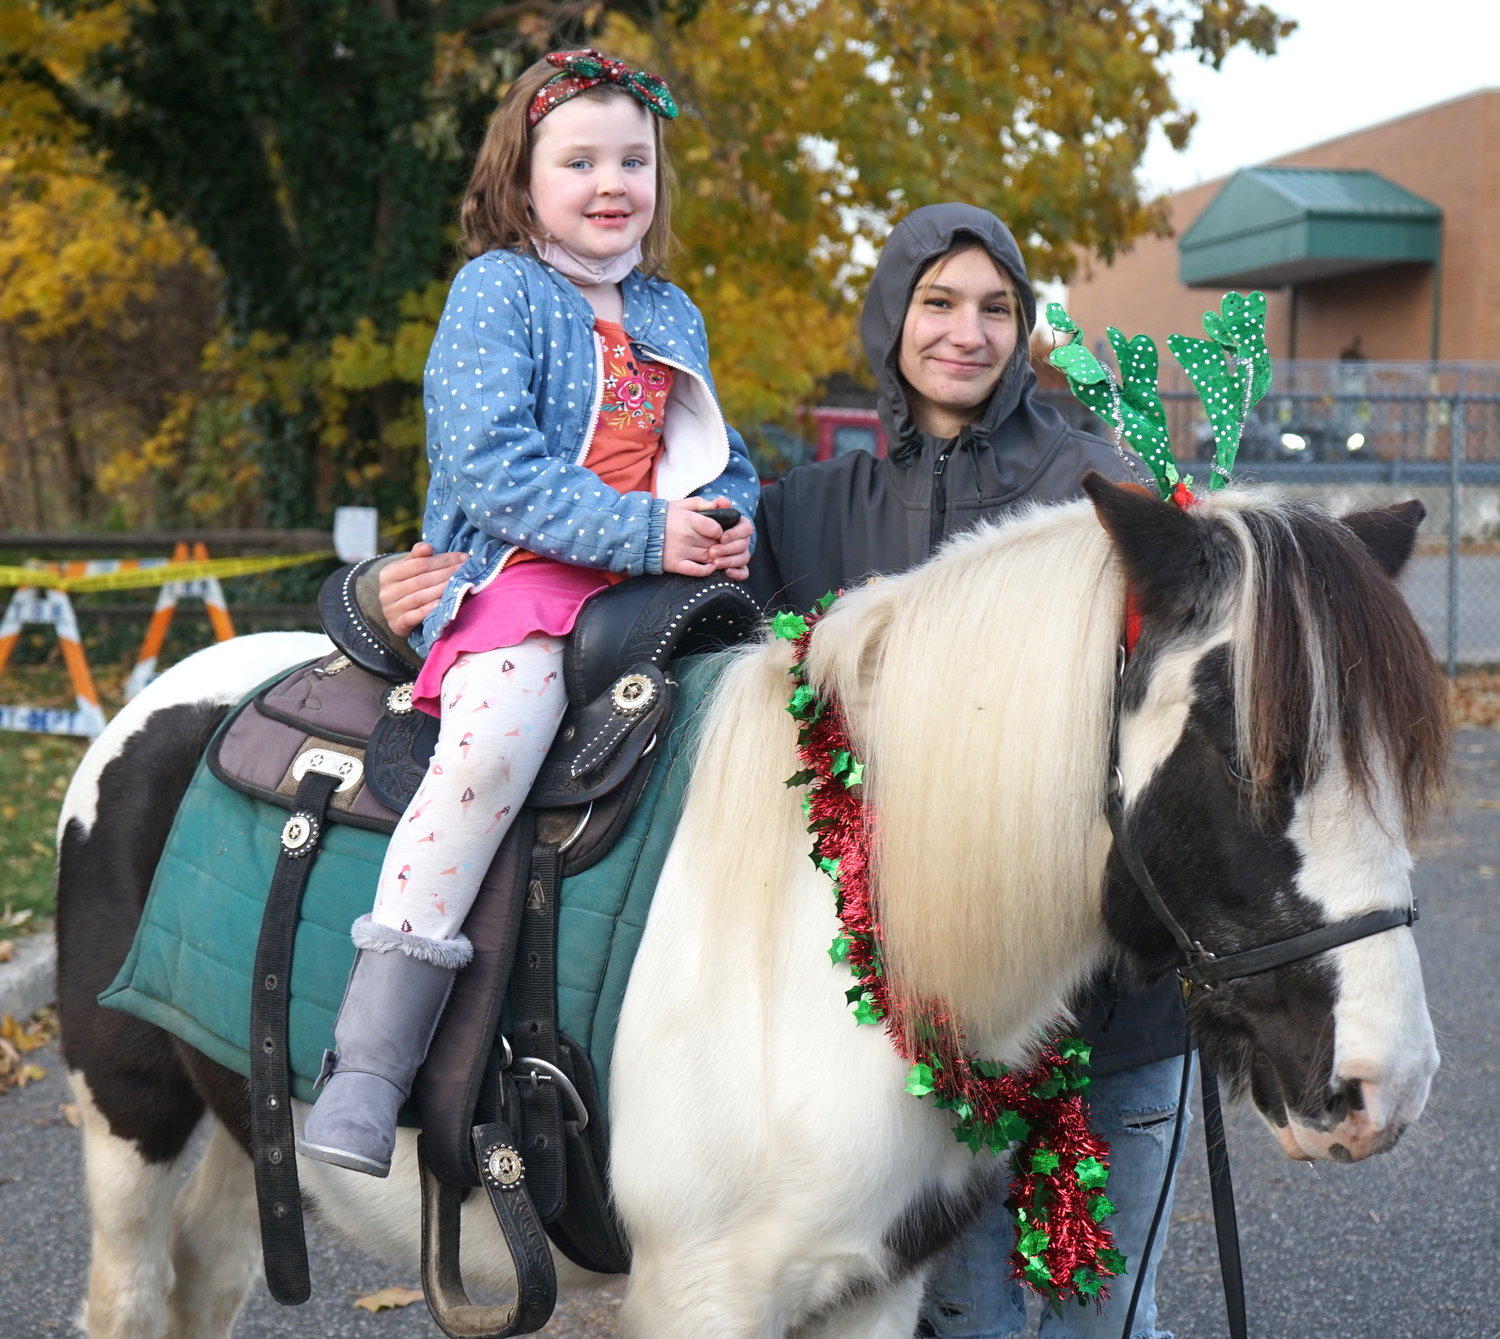 Lucy Cain, 7, rode a pony, which was sponsored by various Baldwin businesses.